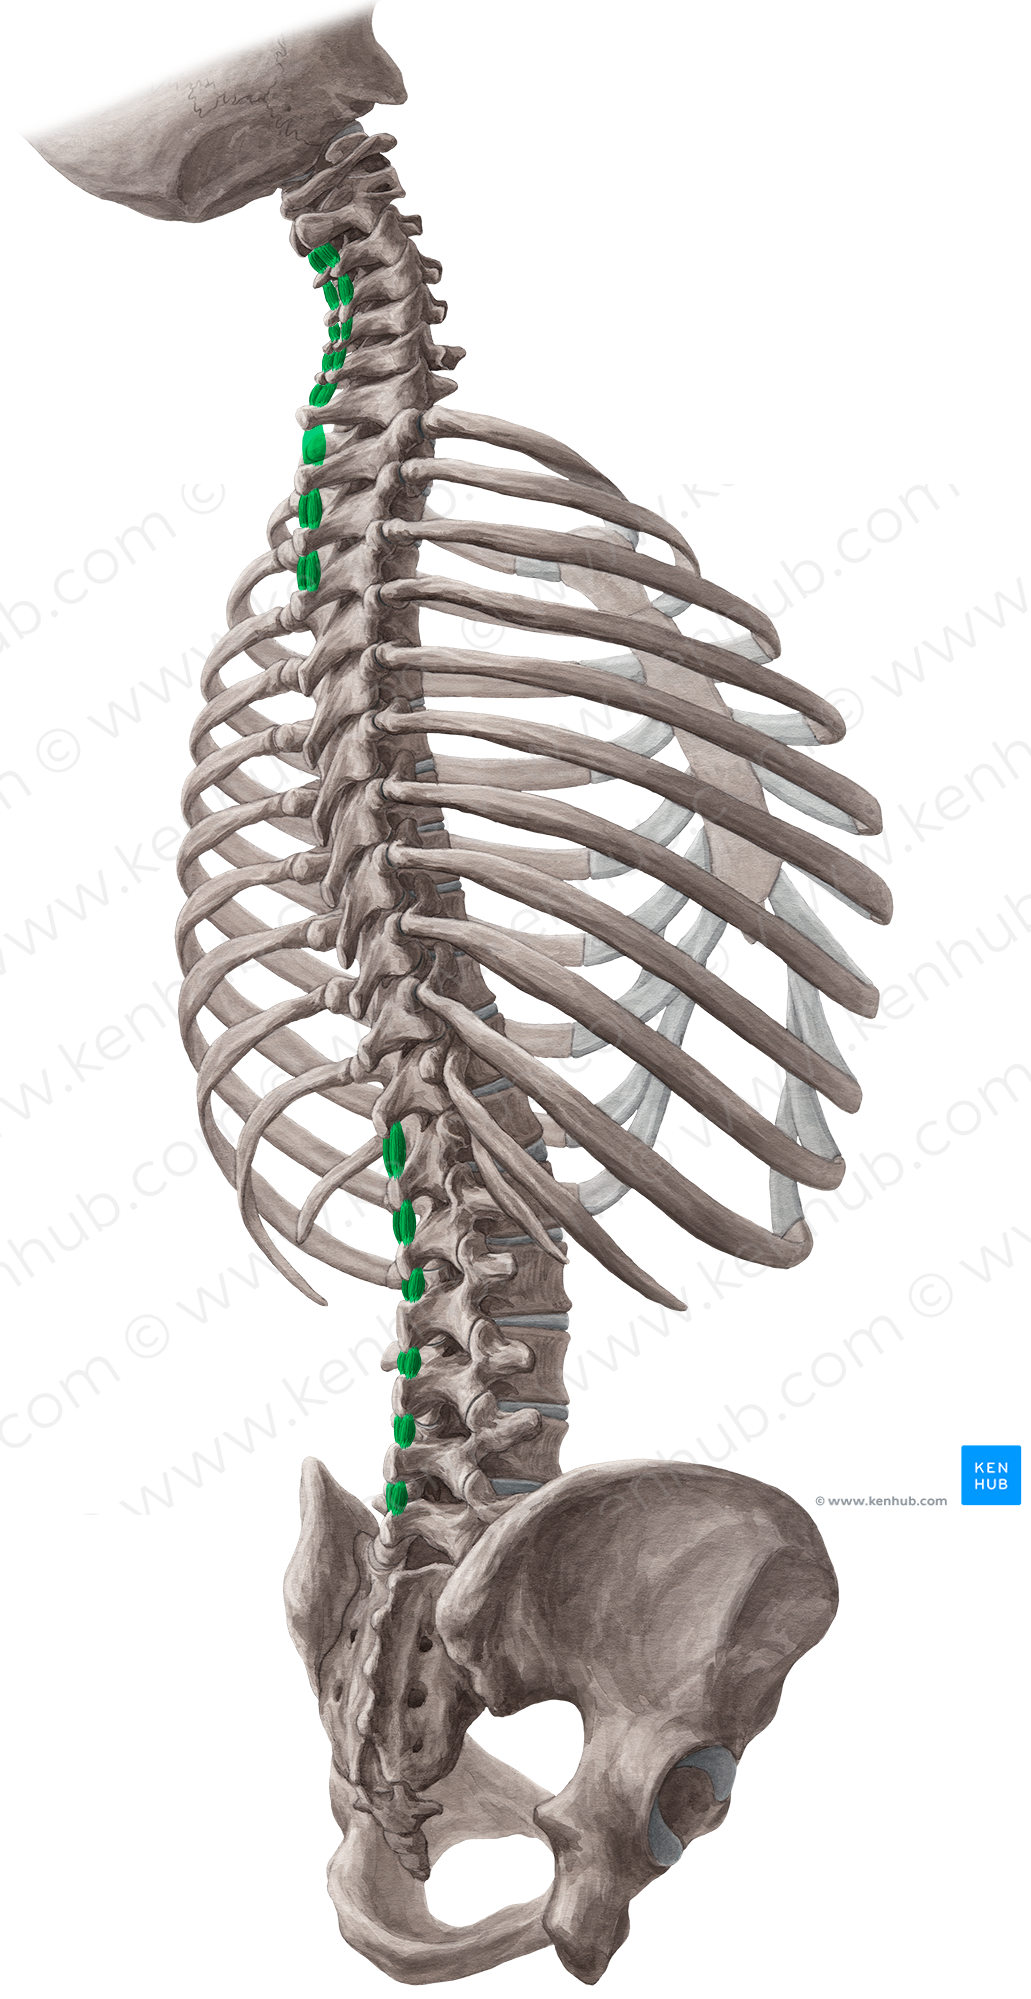 Interspinales muscles (#5135)